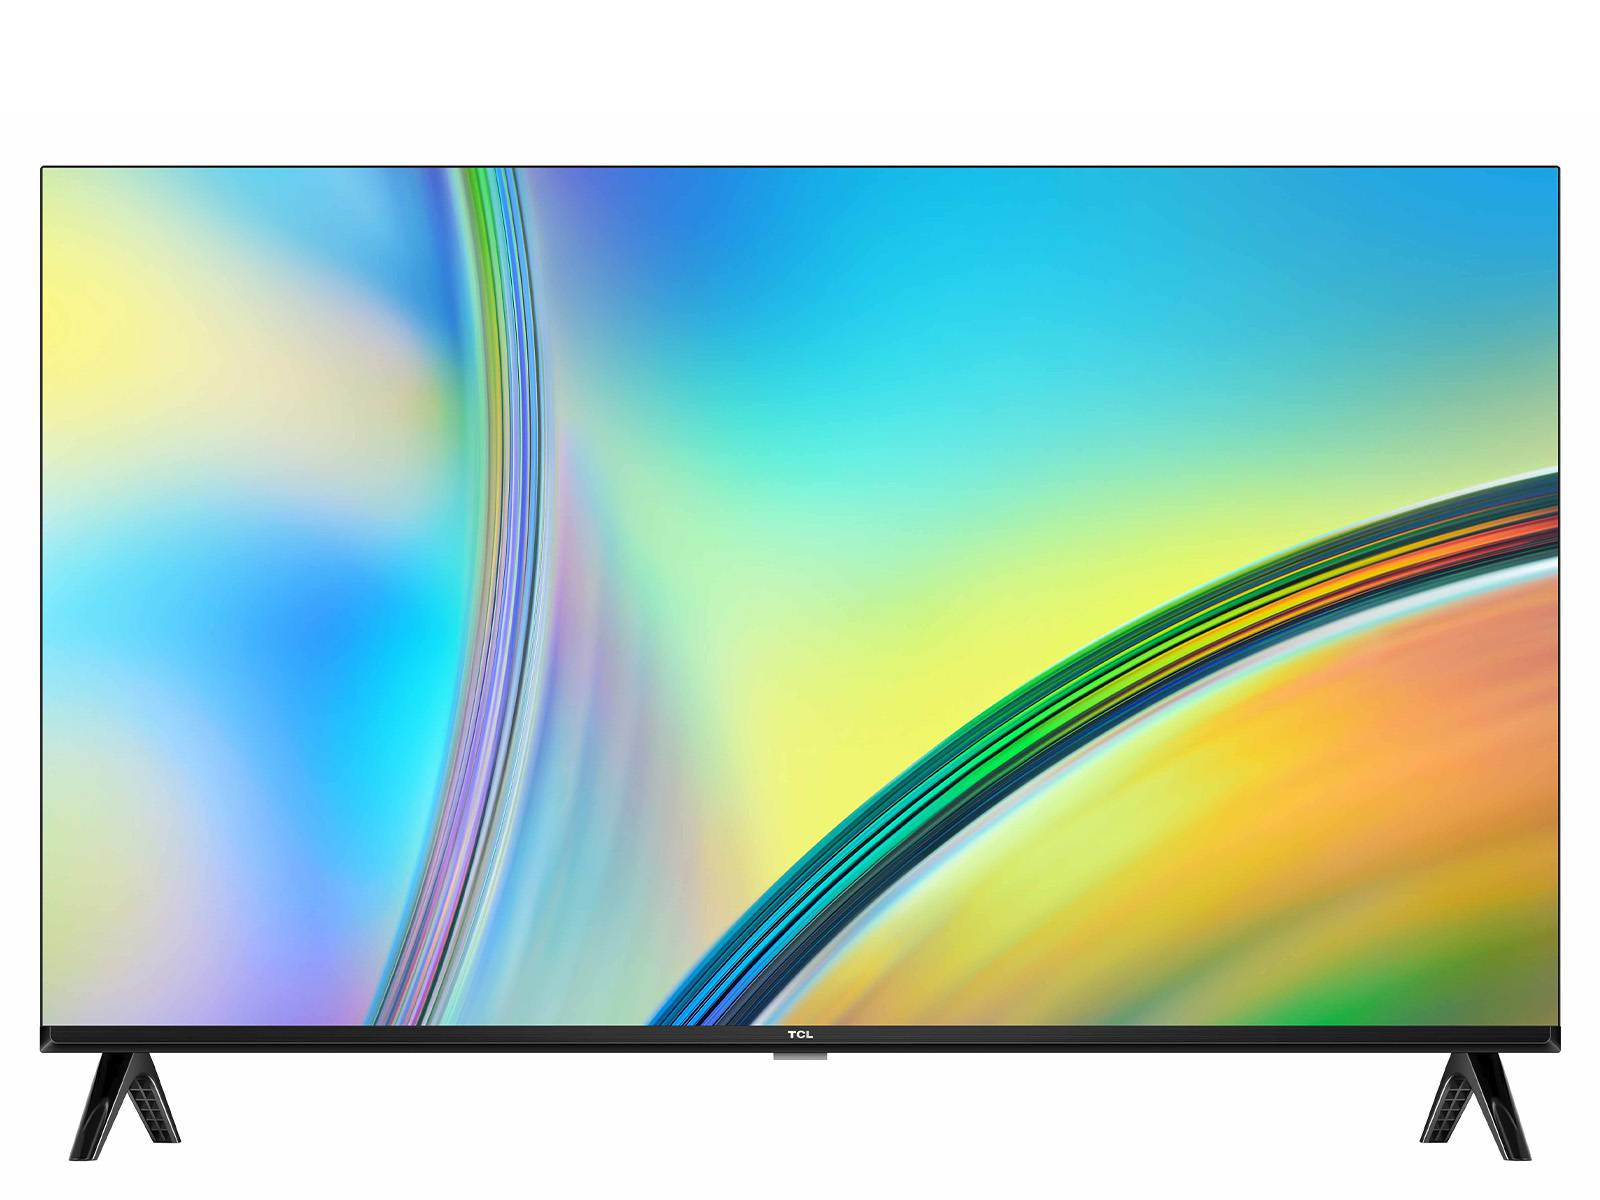 TCL S54 Series 32S5409A TV